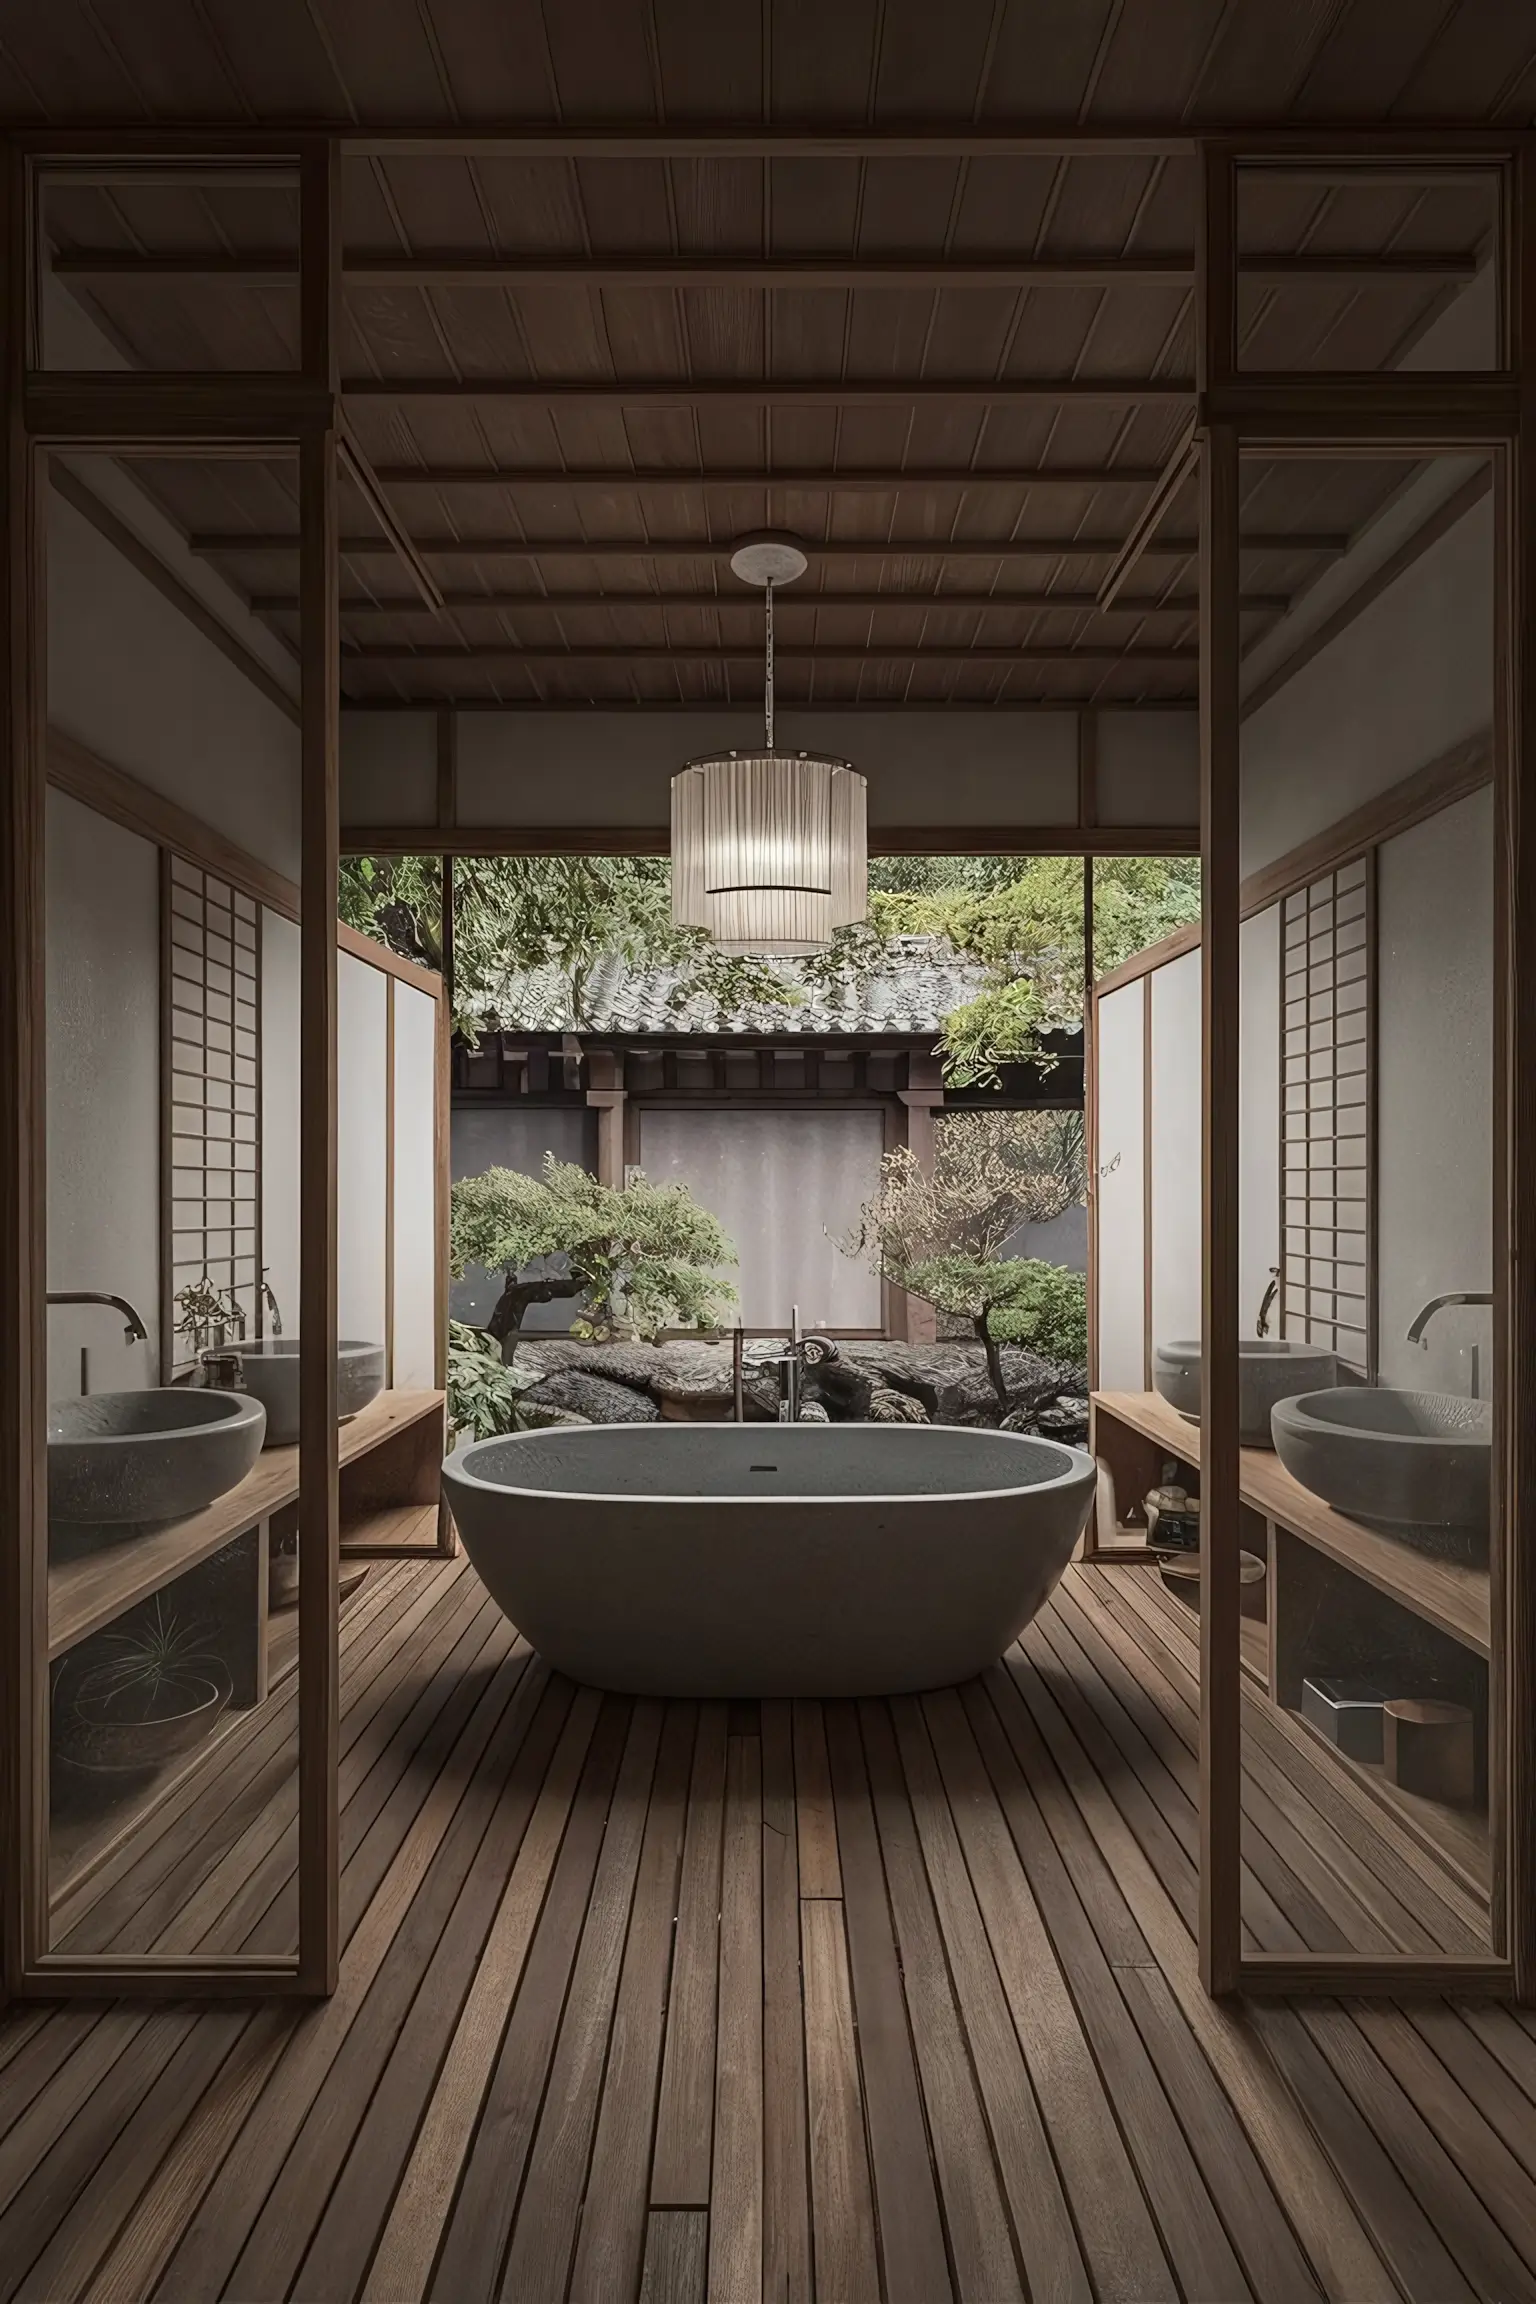 Japandi-style bathroom with clean lines and natural materials.